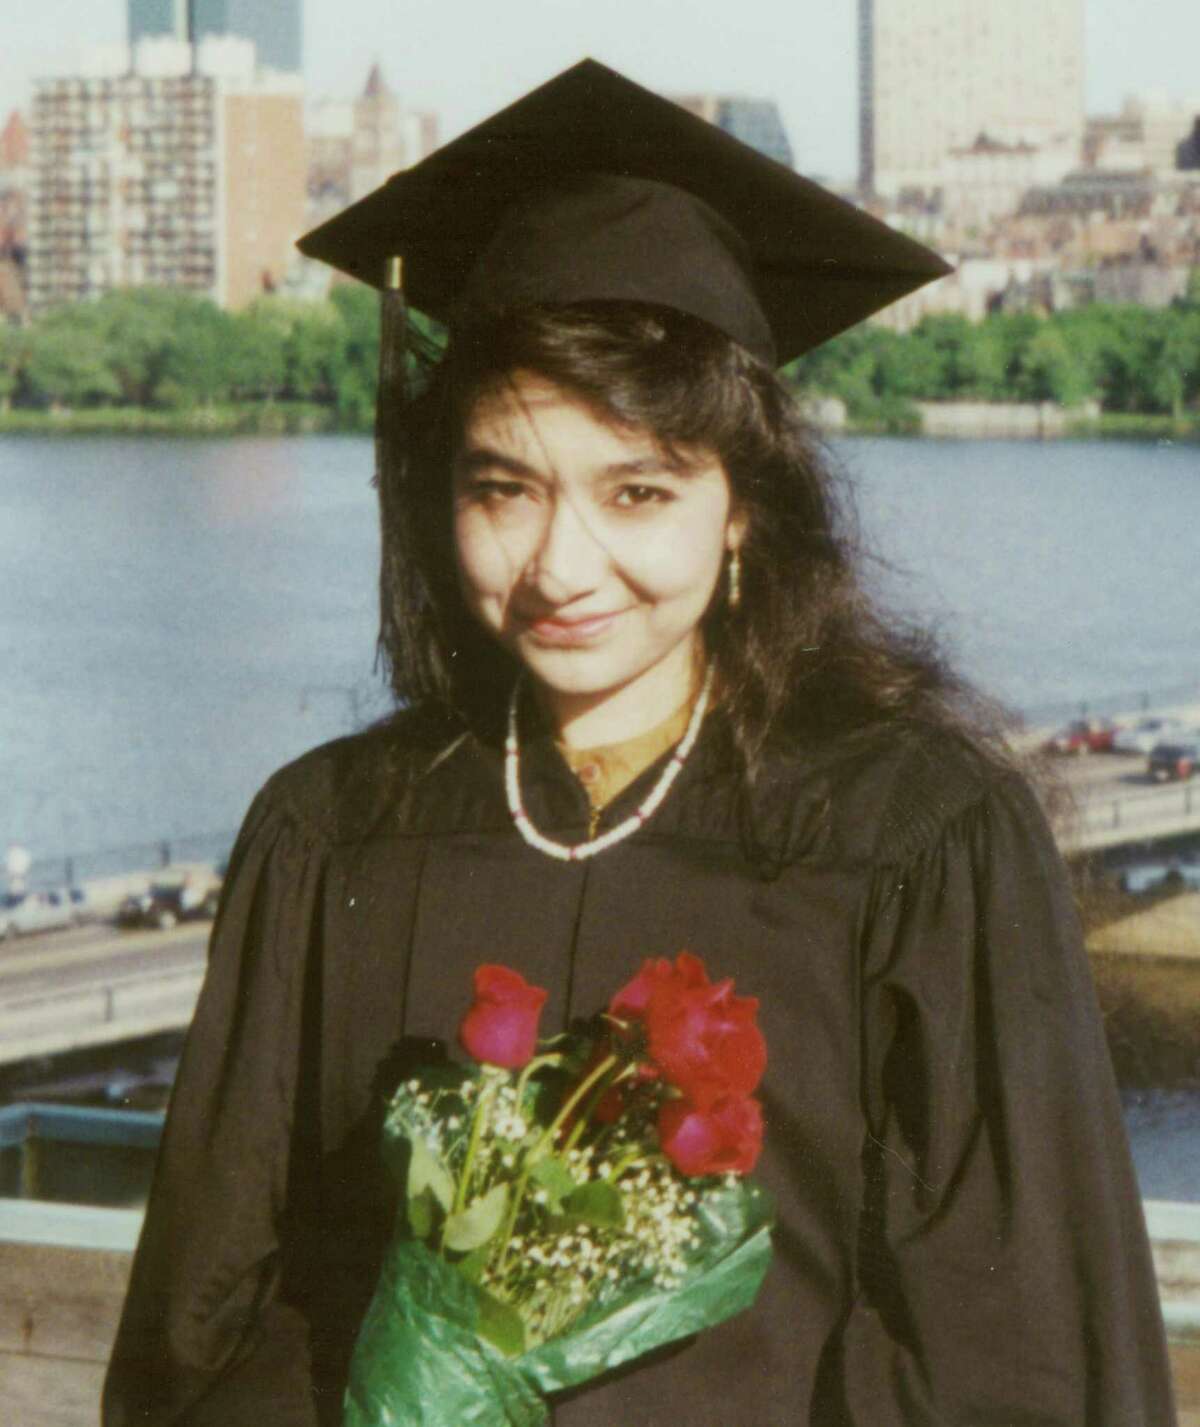 In this undated photo provided by the law firm Whitfield, Sharp and Sharp, Aafia Siddiqui is shown after her graduation from Massachusetts Institute of Technology. Siddiqui, 36, was convicted of multiple felonies. She was arrested outside an Afghan governor's compound, where authorities allege she was carrying bottles and jars of chemicals, papers describing U.S. landmarks, and instructions on how to make chemical weapons. Prosecutors say she was shot by a U.S. Army officer after she grabbed his Army M-4 rifle from the floor and pointed it at an Army captain, crying "Allah Akbar!"